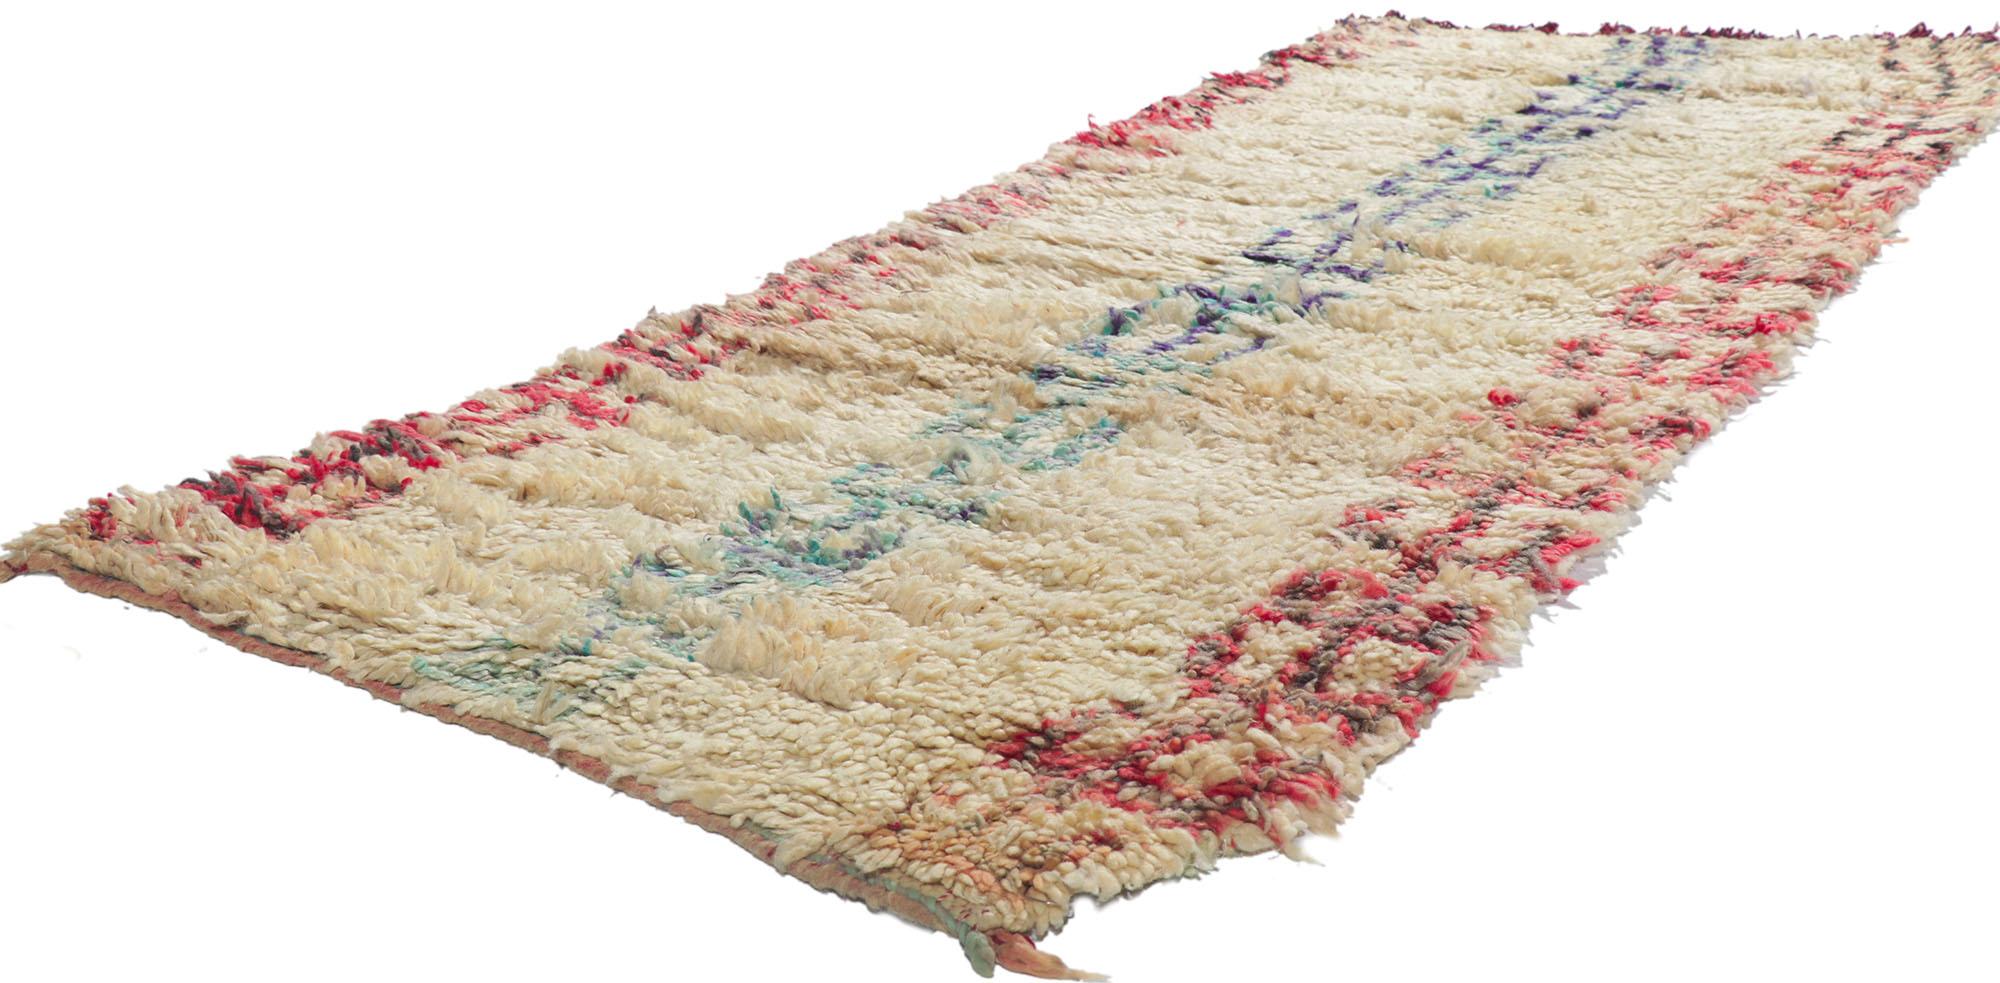 21635 Vintage Berber Moroccan Azilal rug 02'05 x 07'00. With its simplicity, tribal style, incredible detail and texture, this hand knotted wool vintage Berber Moroccan Azilal rug is a captivating vision of woven beauty. The abrashed field features